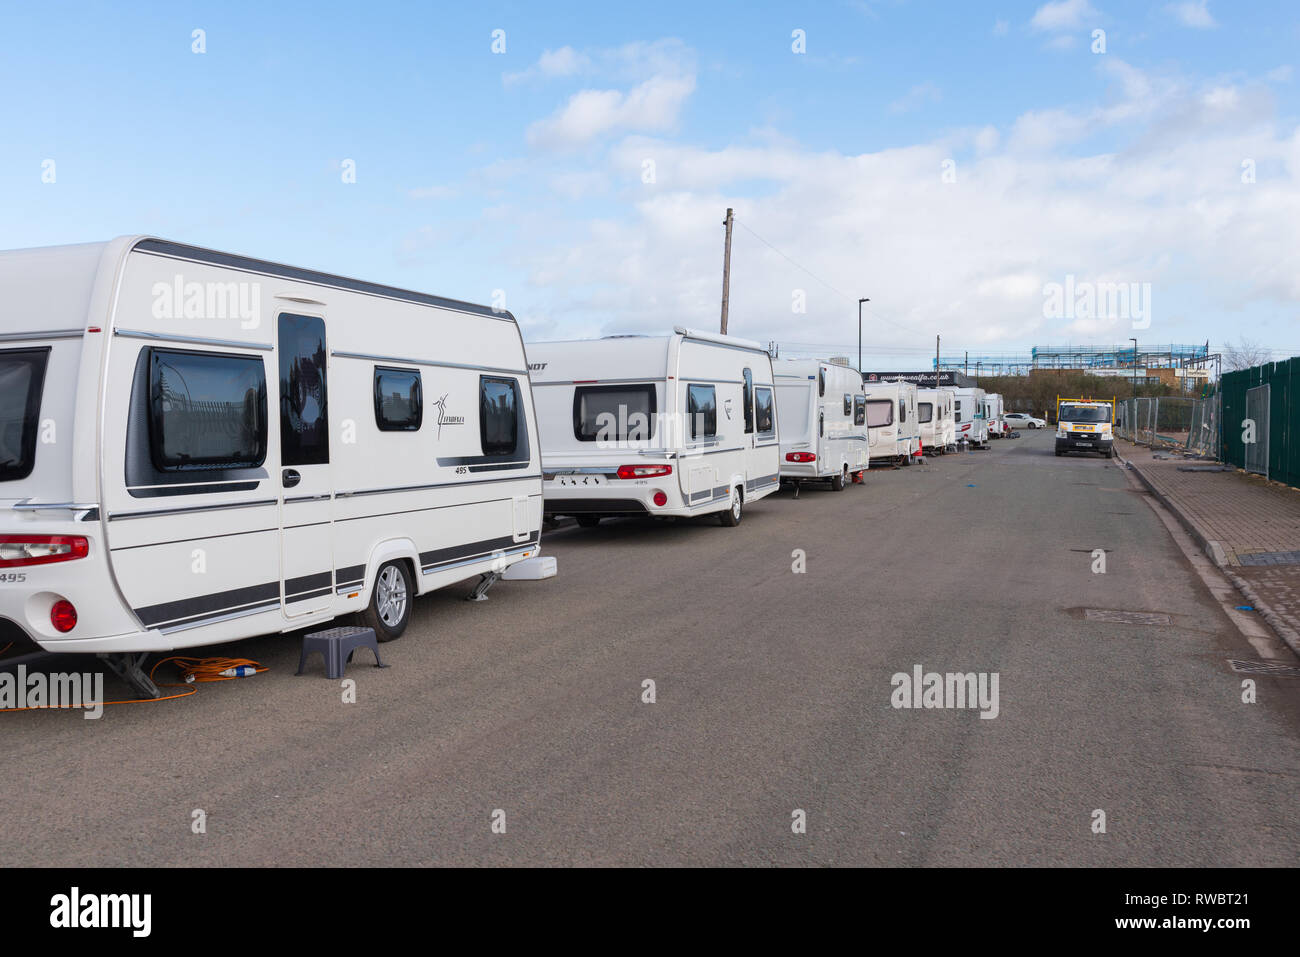 A line of travellers' caravan parked on a road in Ladywood, an inner city district of Birmingham Stock Photo